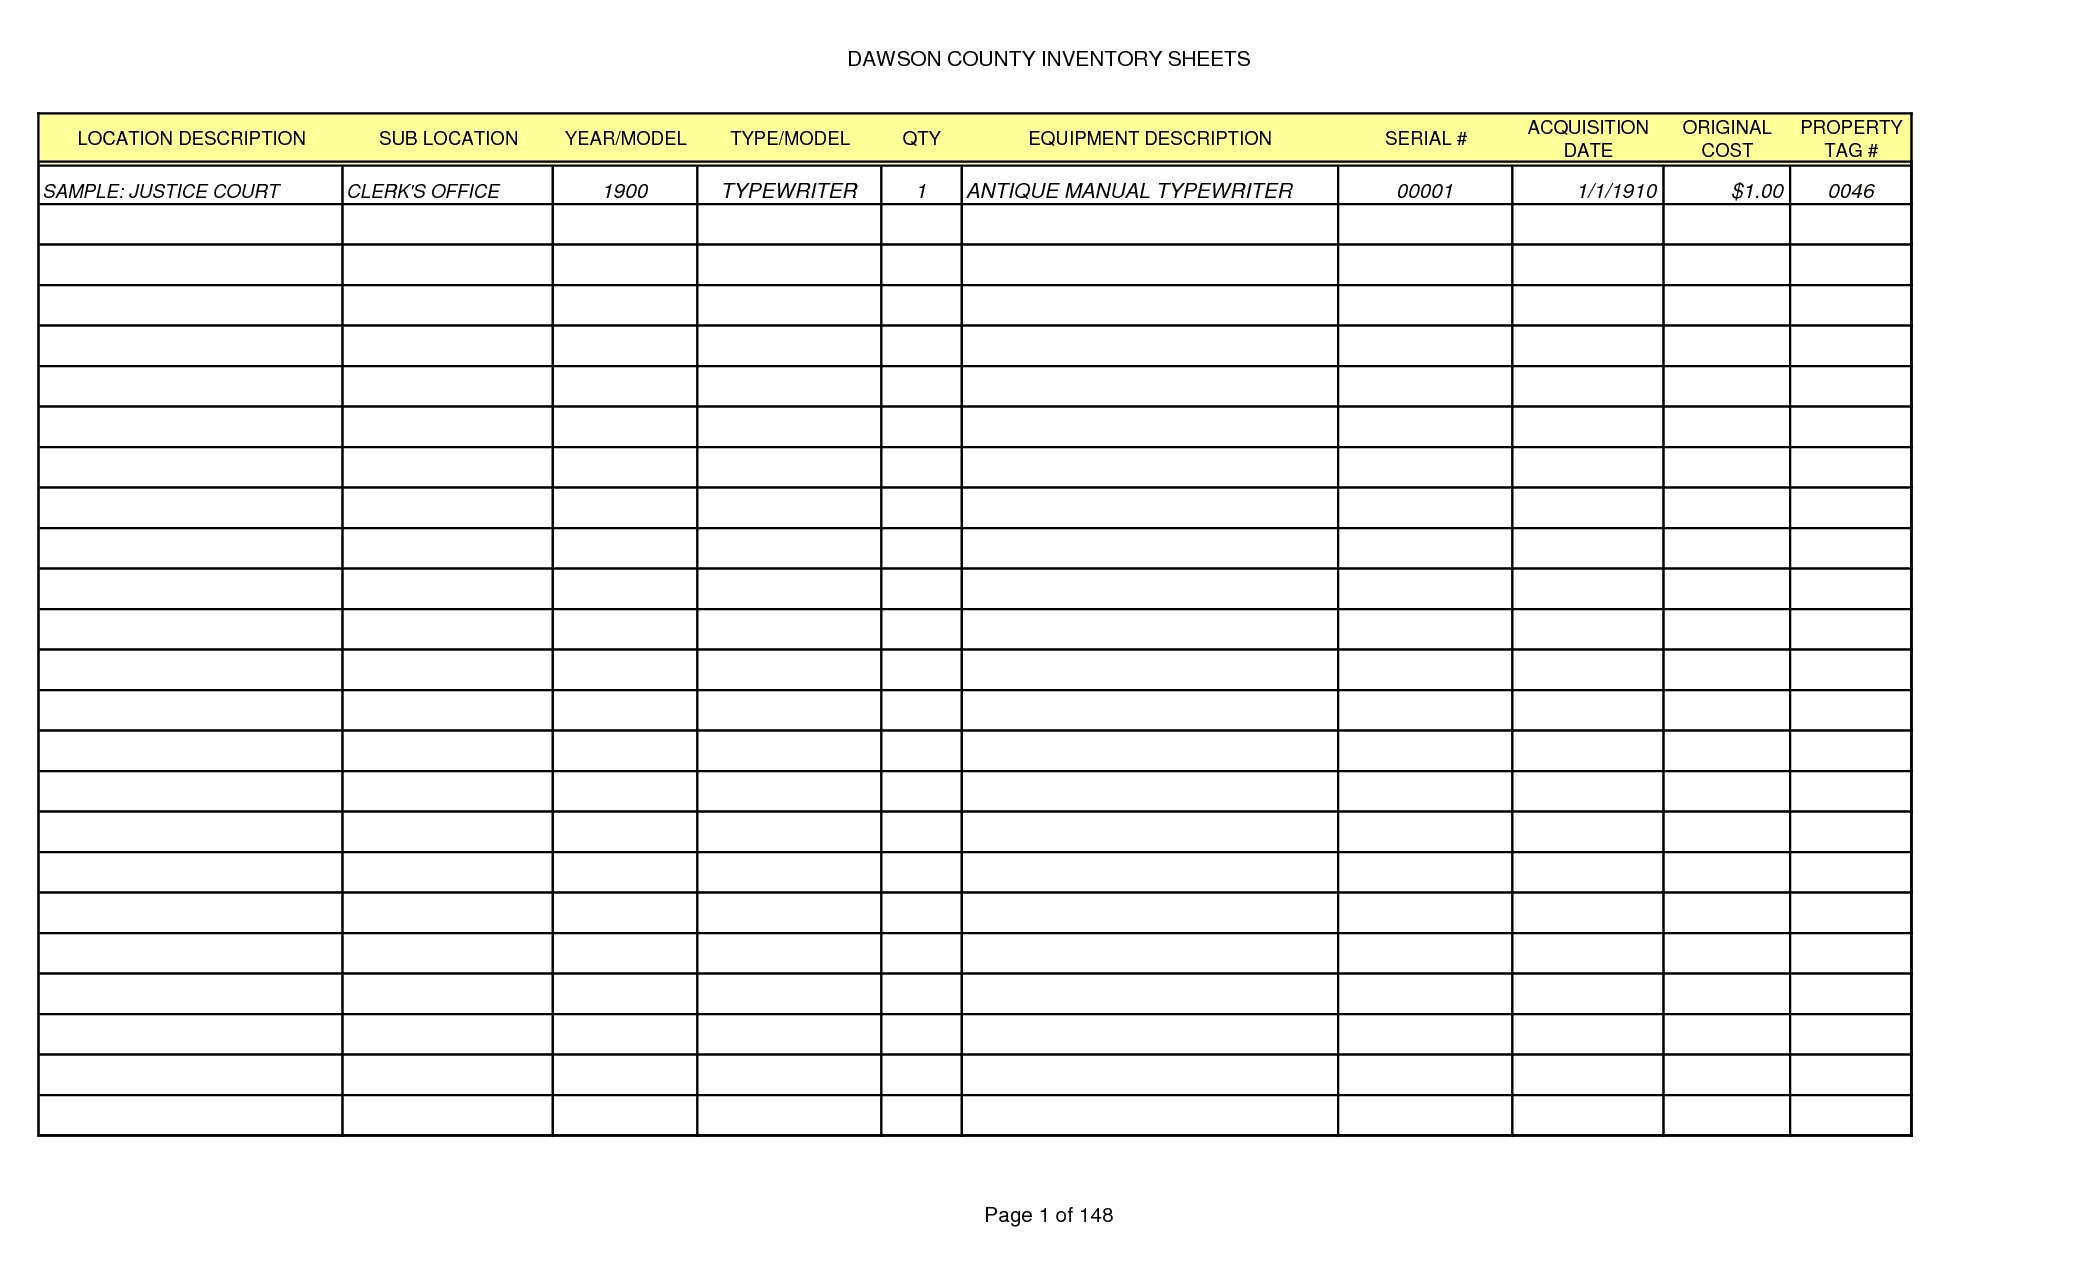 Sample Inventory Spreadsheet Product And Sheet Compatible To Sample Inventory Spreadsheet